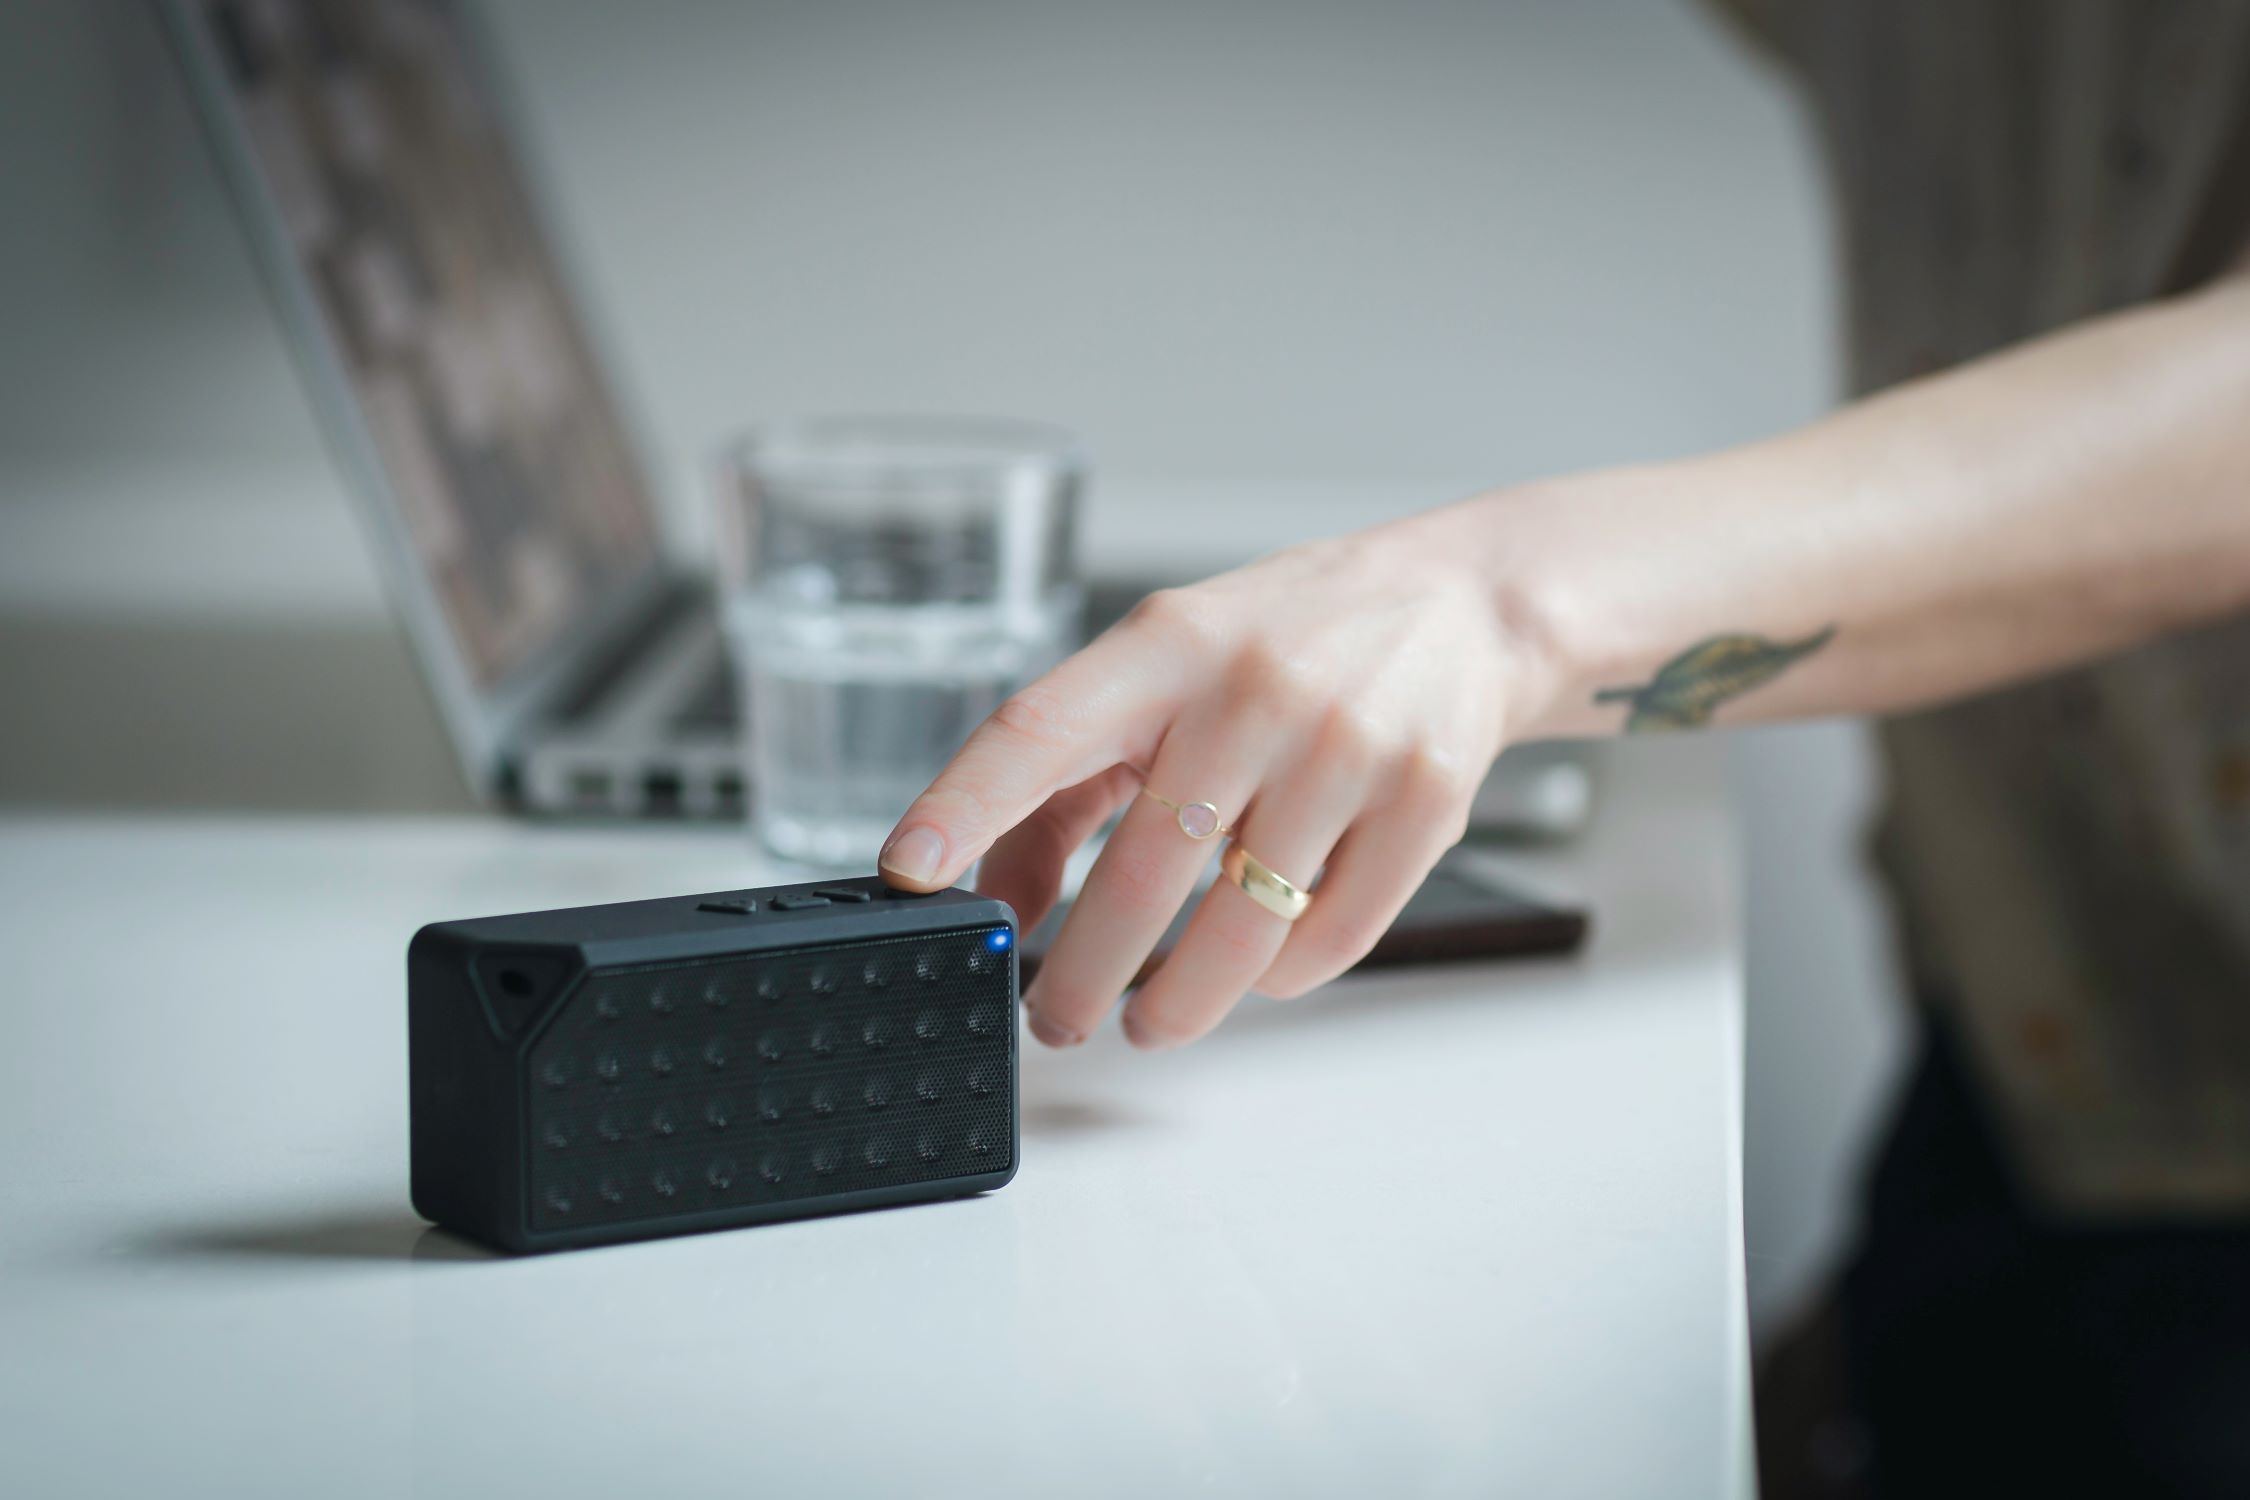 Tips To Make Your Bluetooth Speakers Sound Better And Enhance Audio Quality